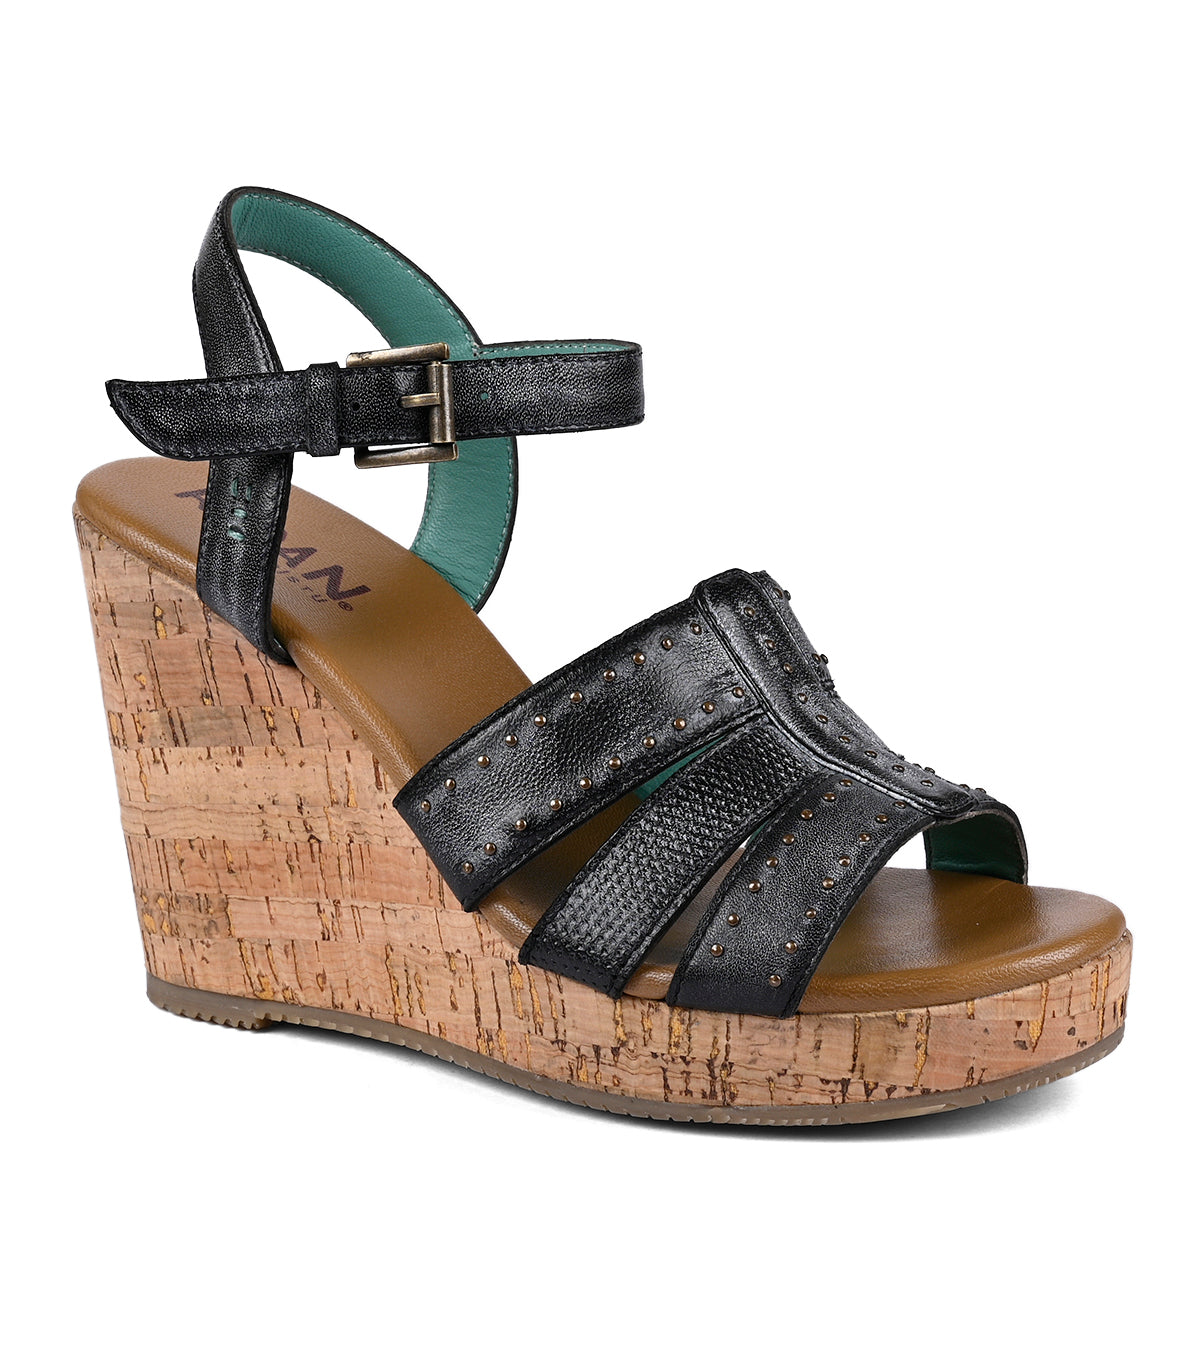 Roan Different black platform wedge sandal with cork heel, featuring studded straps and a buckle closure, isolated on a white background.